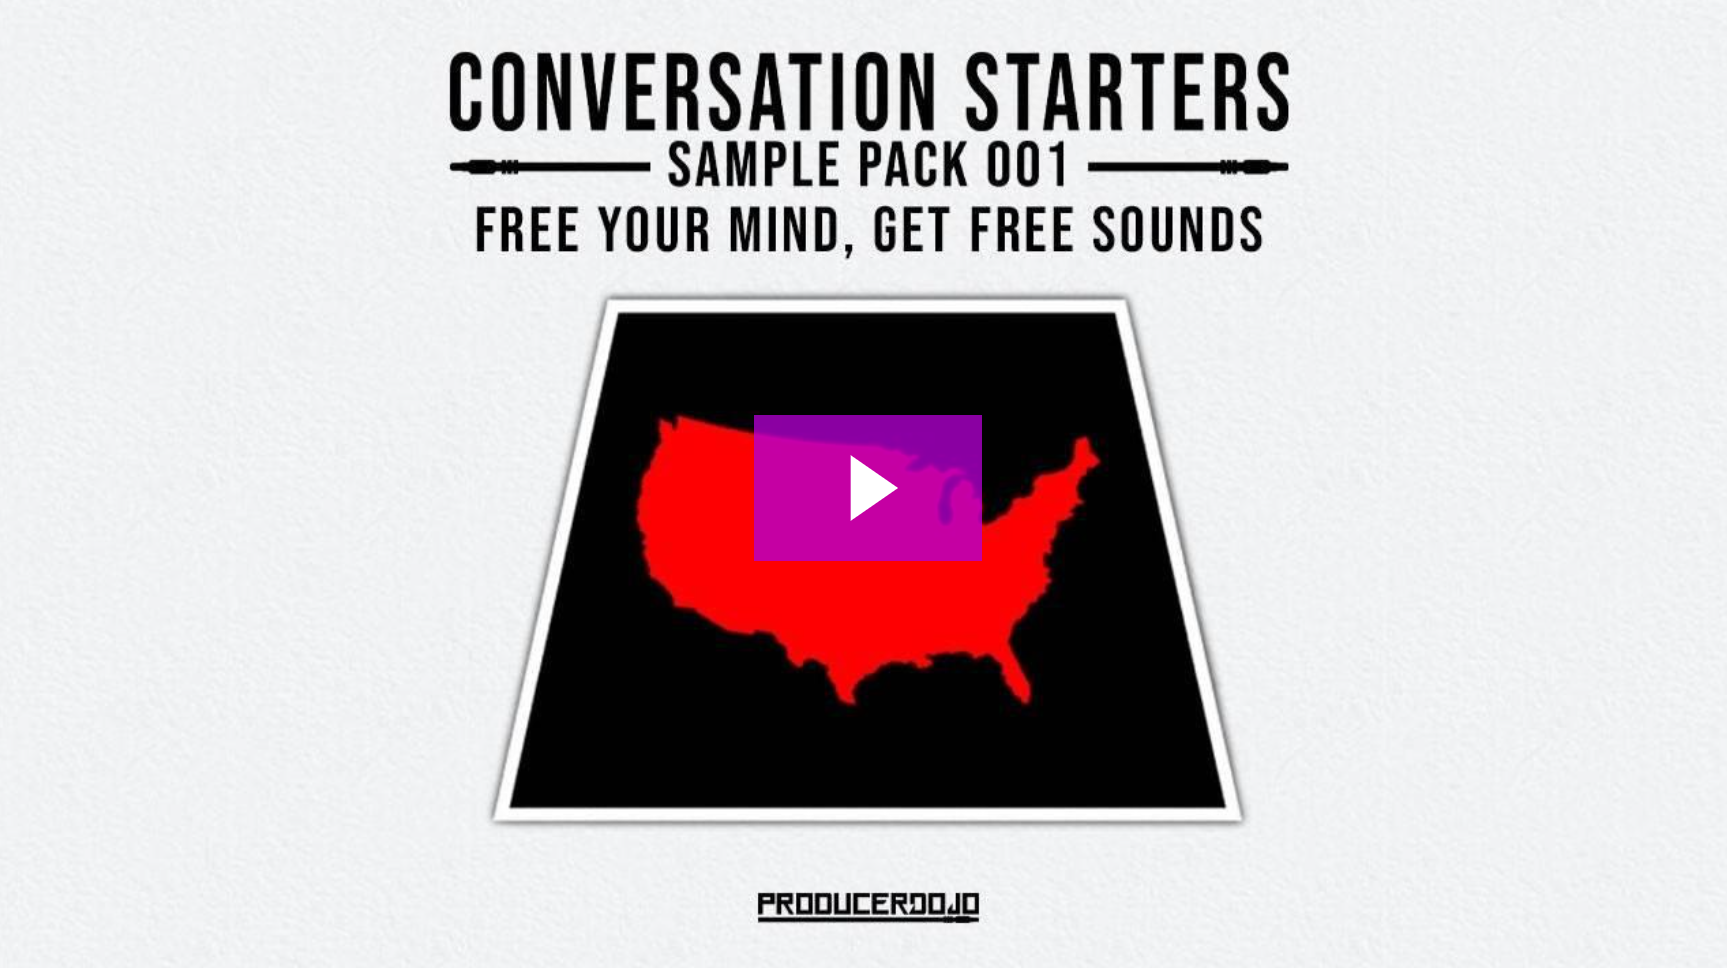 Free Sample Pack. Free Your Mind, Get Free Sounds.